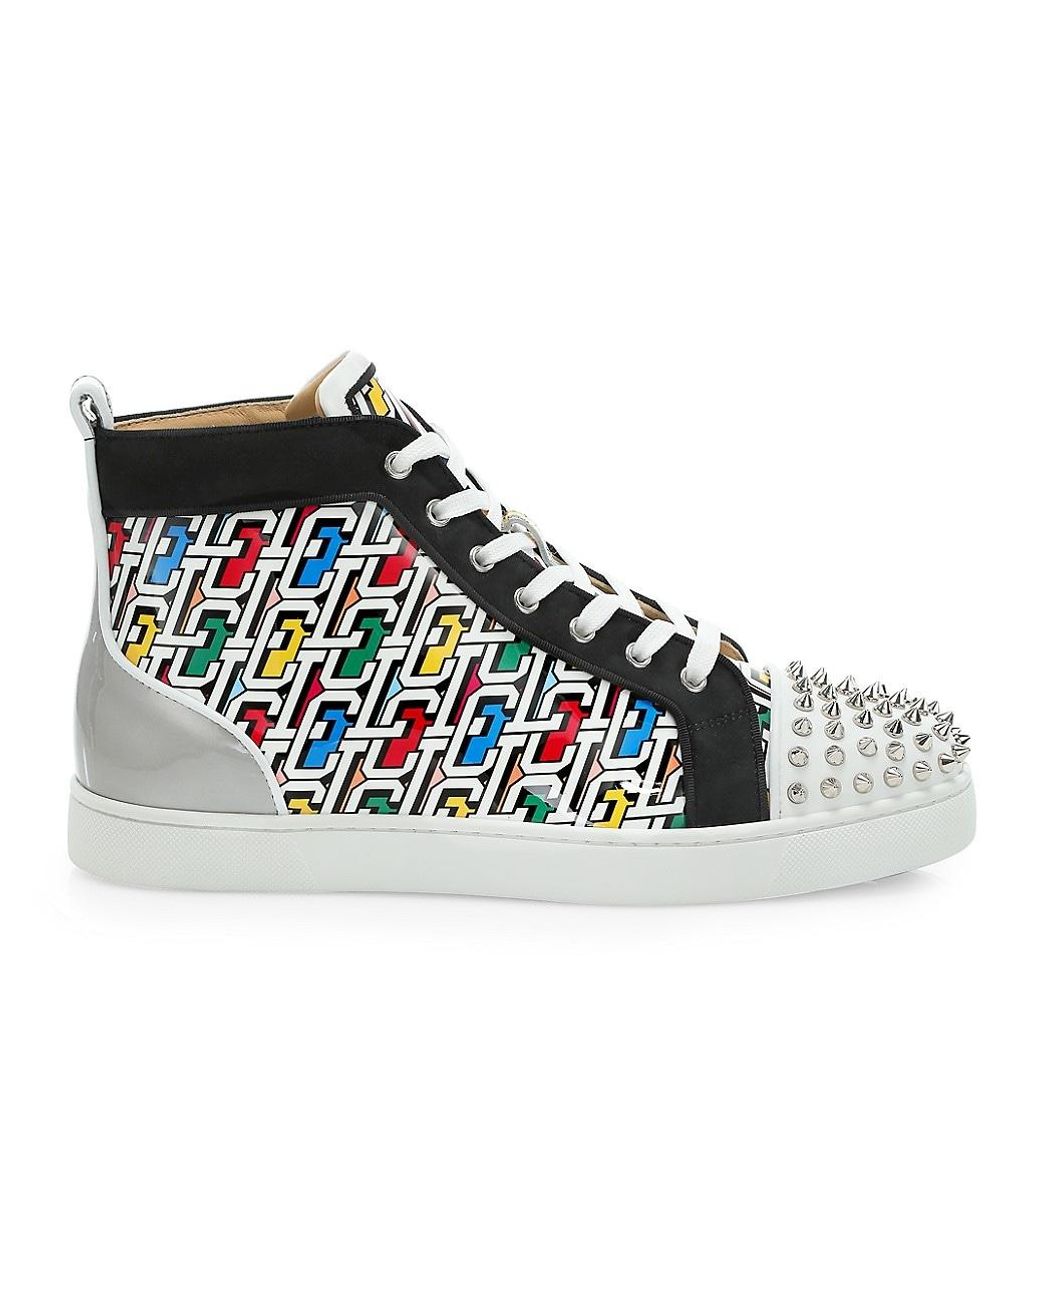 Christian Louboutin Leather Lou Spikes Orlato Flat High-top Sneakers in  Silver (Metallic) for Men - Lyst